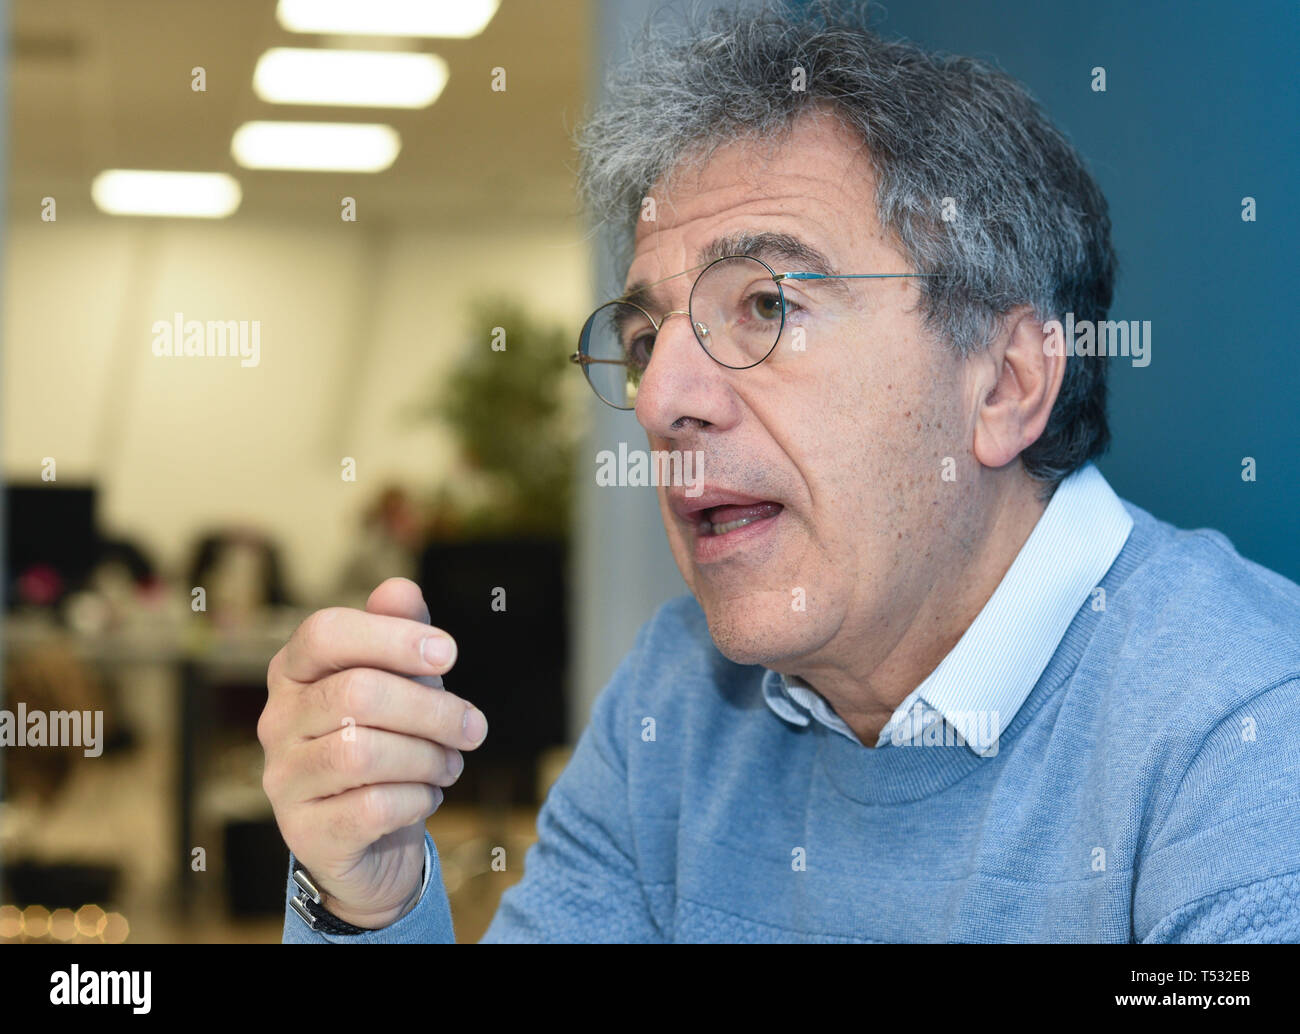 *** FRANCE OUT / STRICTLY NO SALES TO FRENCH MEDIA *** November 23, 2018 - Paris, France: Portrait of the CEO of Happn, Didier Rappaport. Happn is a French start-up that developed a dating app allowing users to meet people based on their geolocalisation patterns. Reportage dans les bureaux de Happn, une start-up parisienne connue pour son app de rencontre basee sur la geolocalisation. Stock Photo